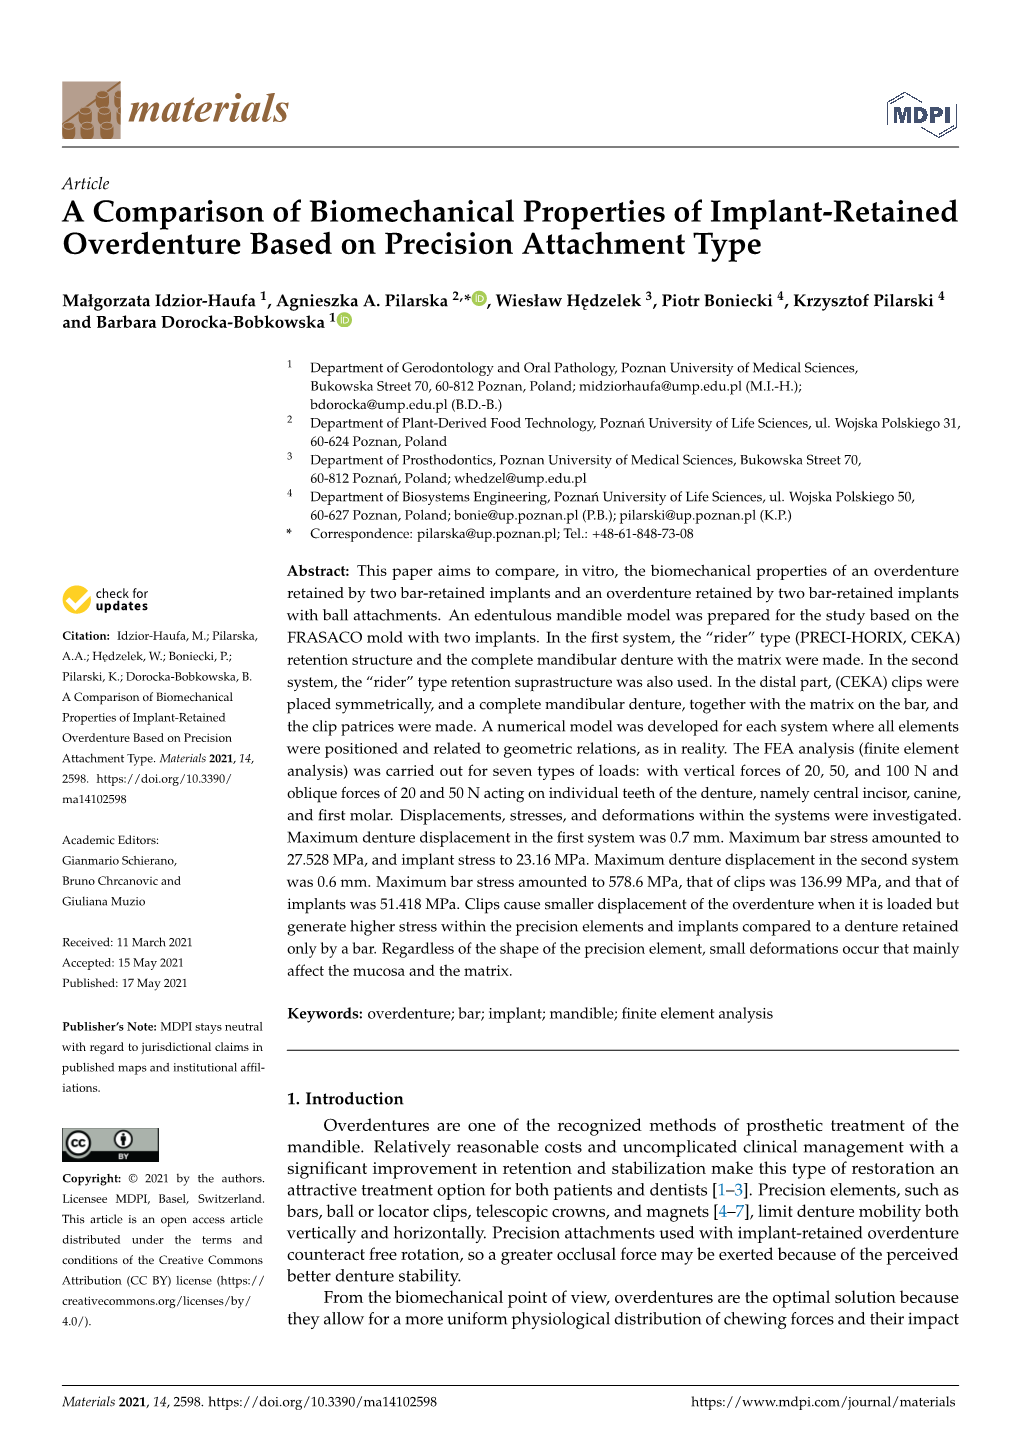 A Comparison of Biomechanical Properties of Implant-Retained Overdenture Based on Precision Attachment Type